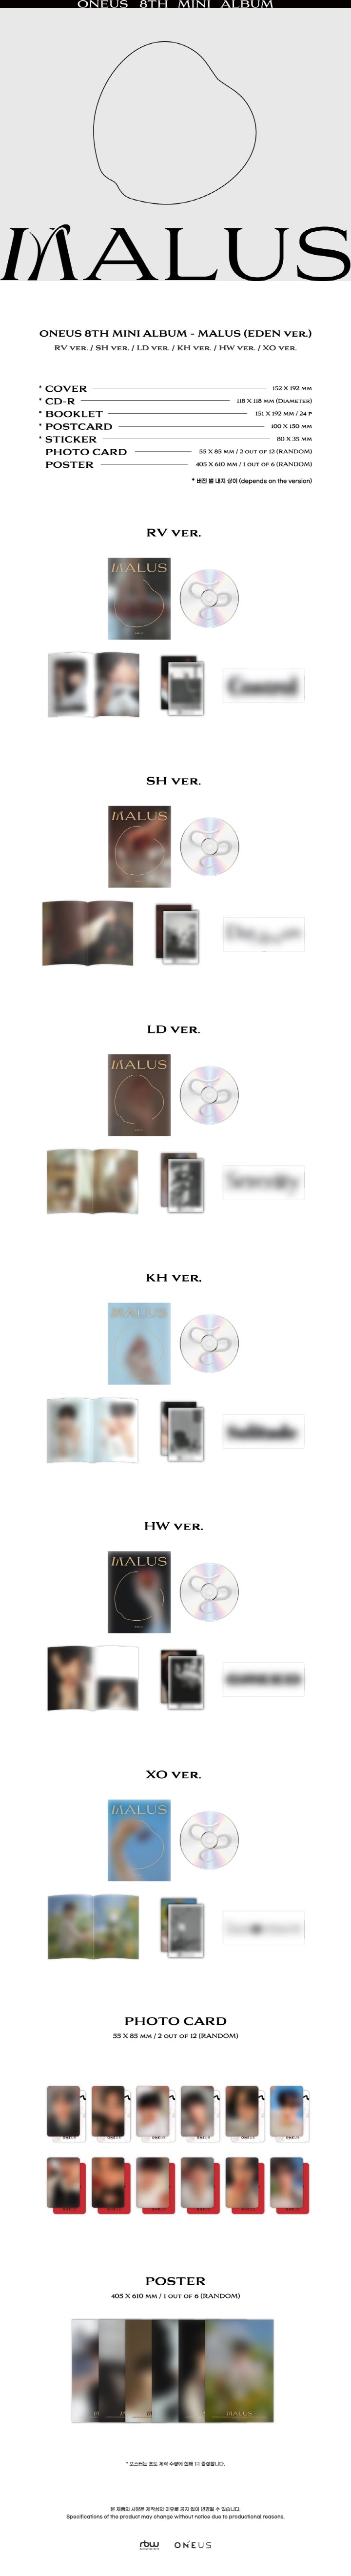 1 CD
1 Booklet (24 pages)
1 Postcard
1 Sticker
2 Photo Cards (random out of 12 types)